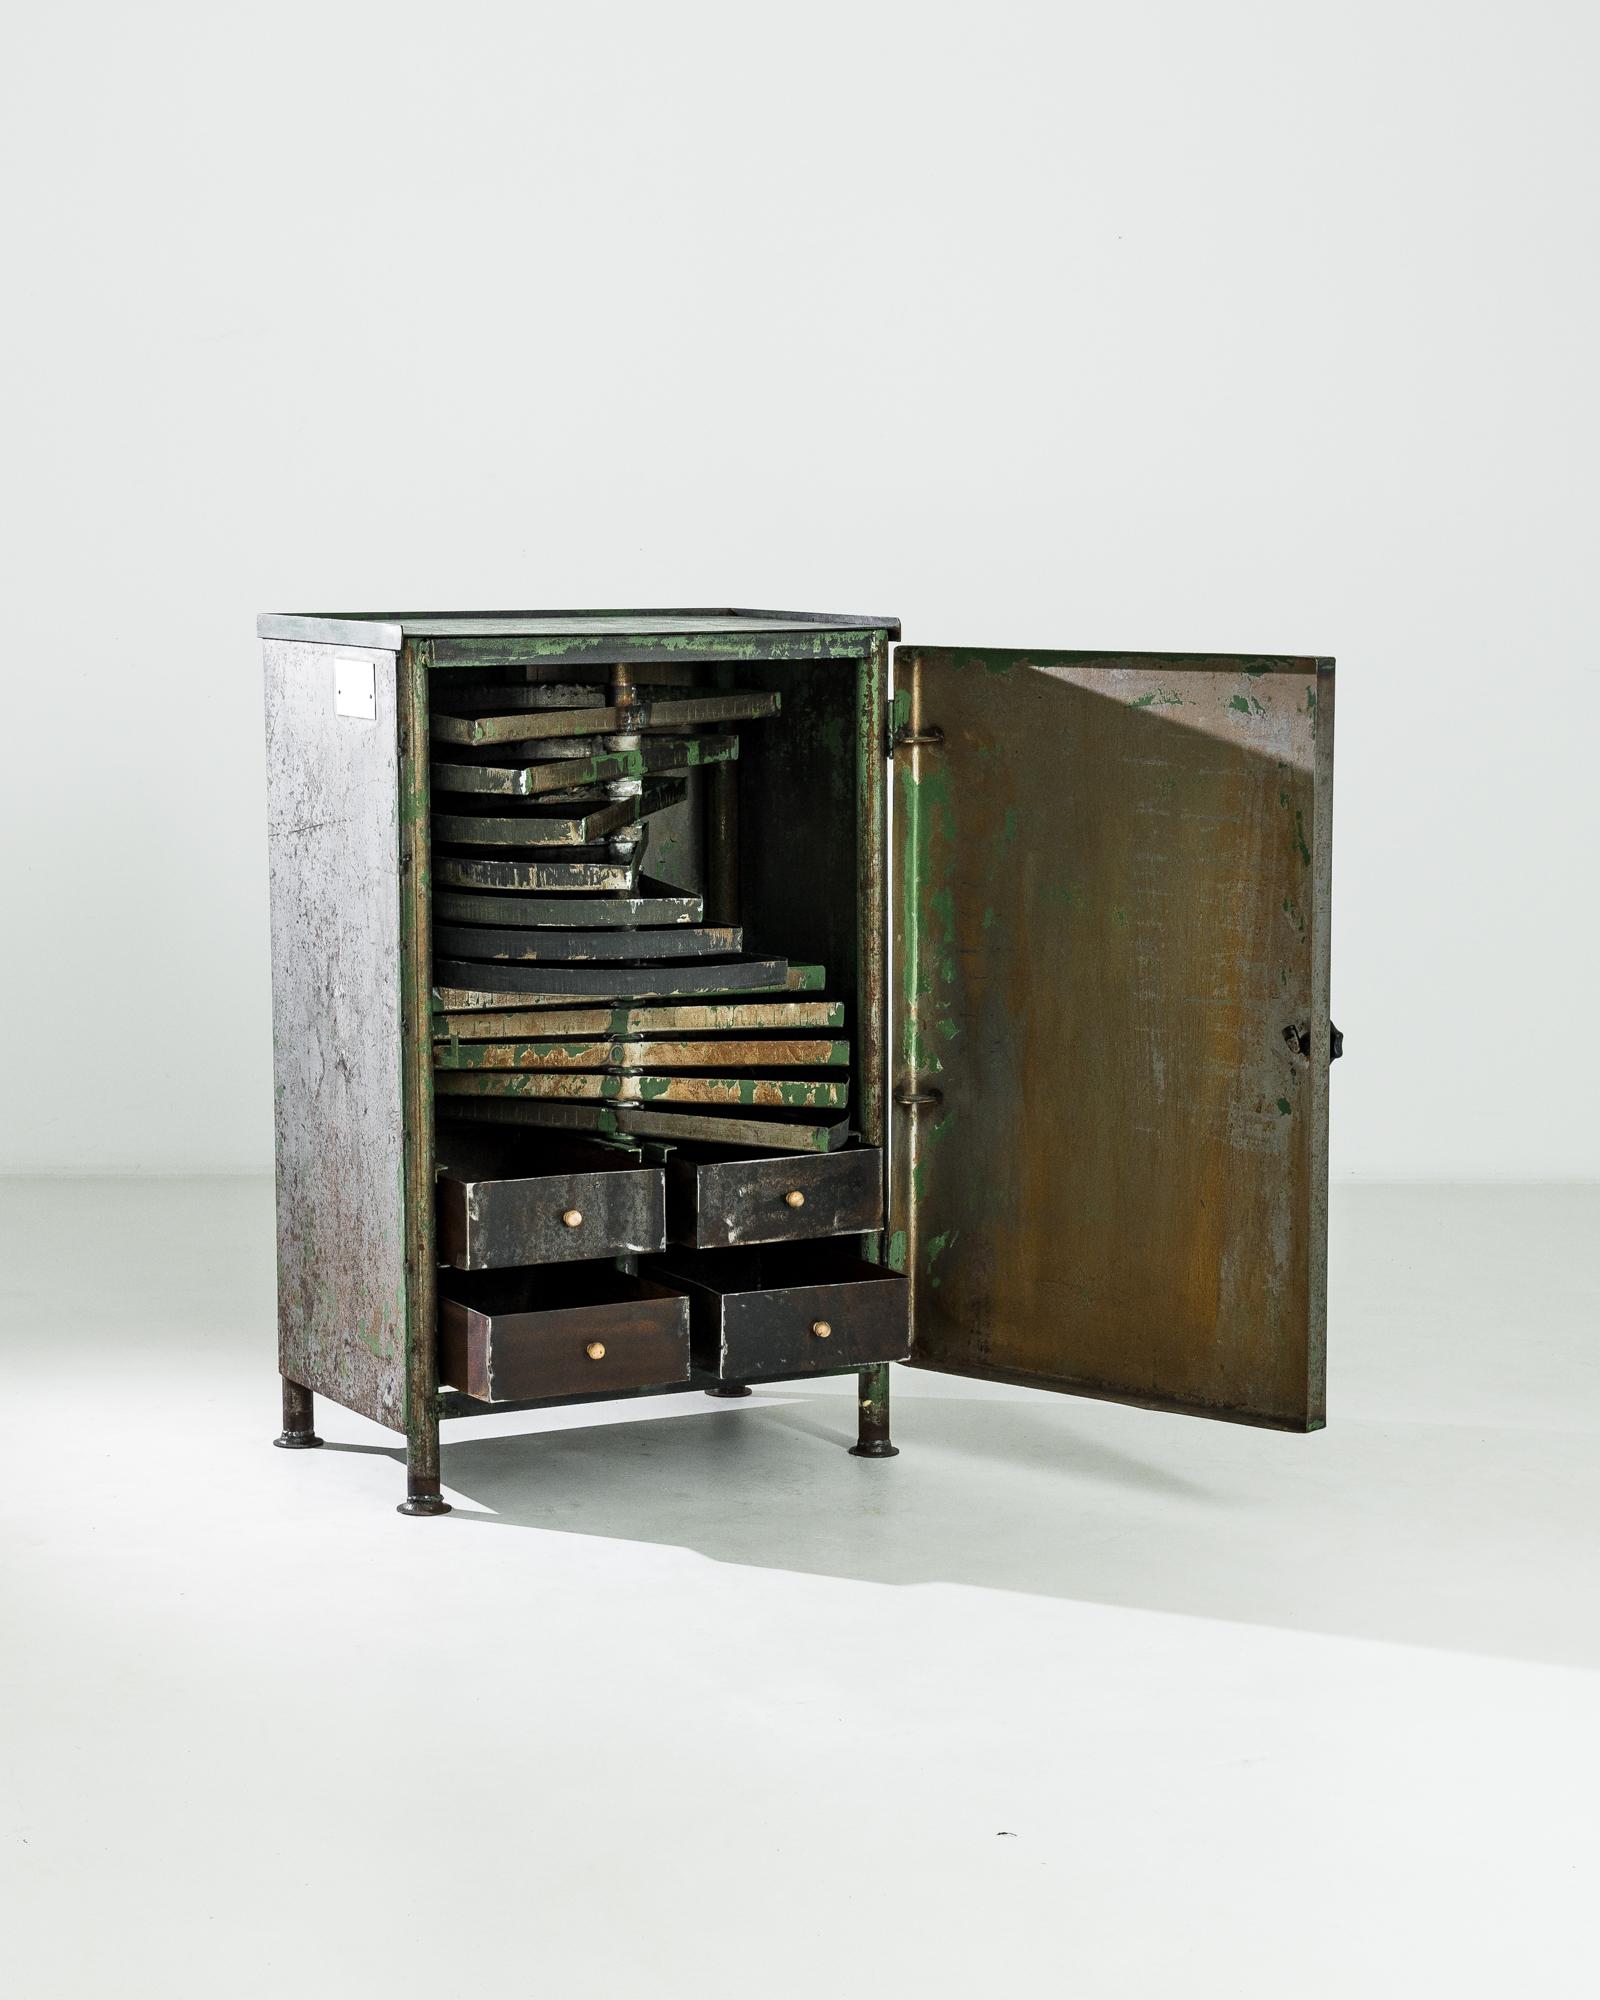 Manufactured in Central Europe circa 1950, this industrial cabinet adopts a perfectly rectangular shape punctuated by short tubular legs. A wide metal door decorated with a minimalist black heptagon pull hides the intricate interior of iron